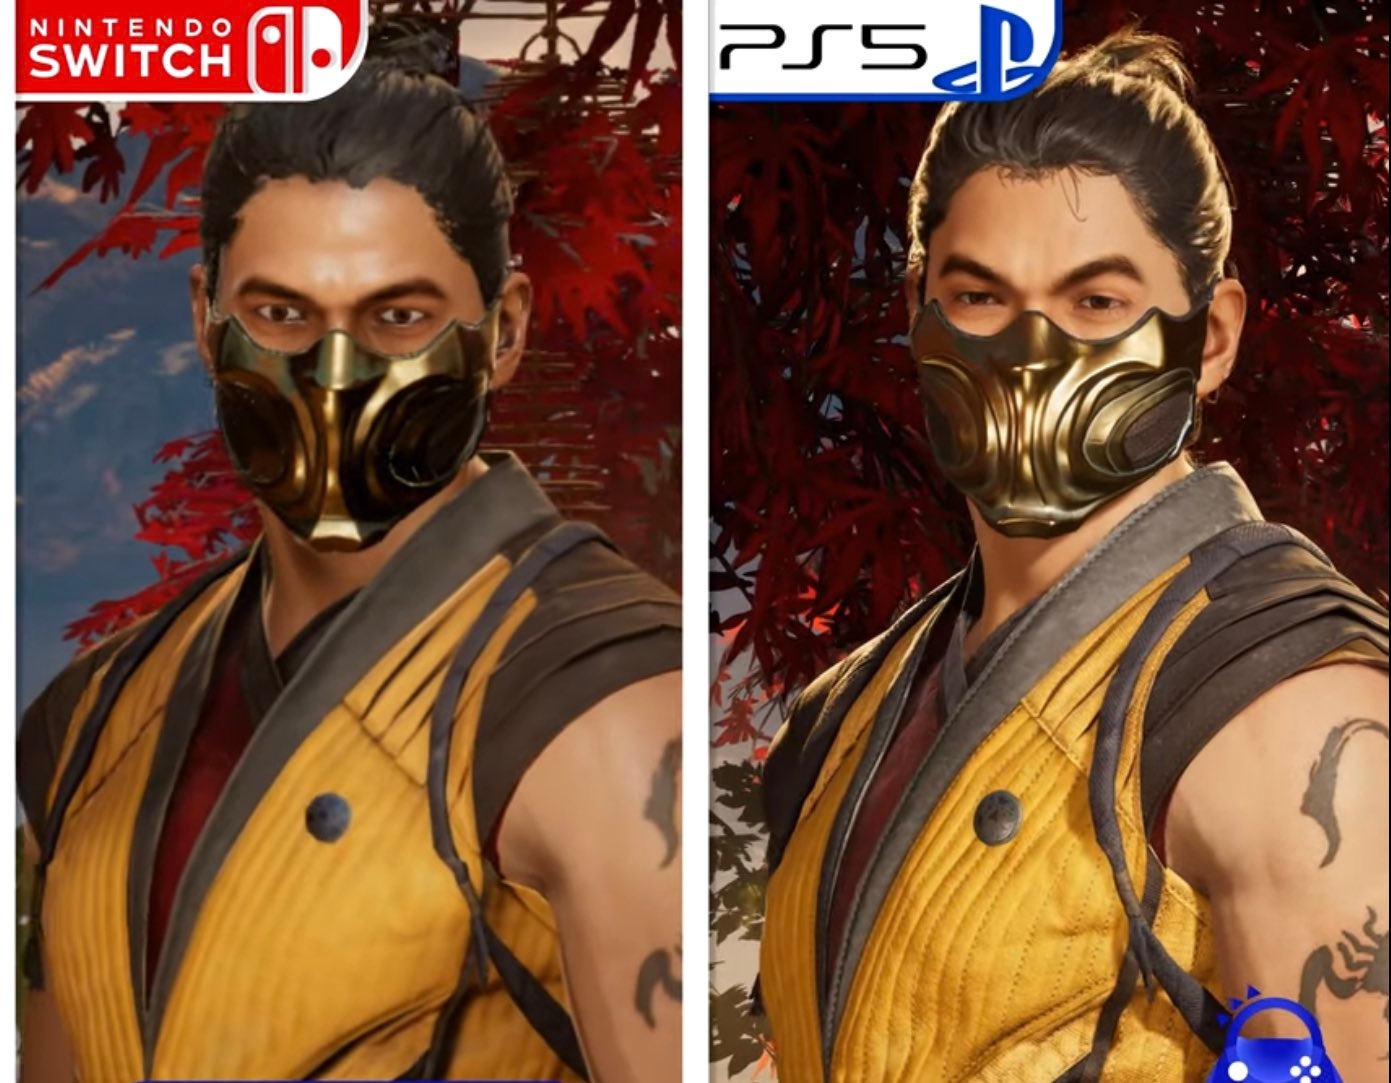 Mortal Kombat 11: PS5 Vs PS4 - What's The Difference?